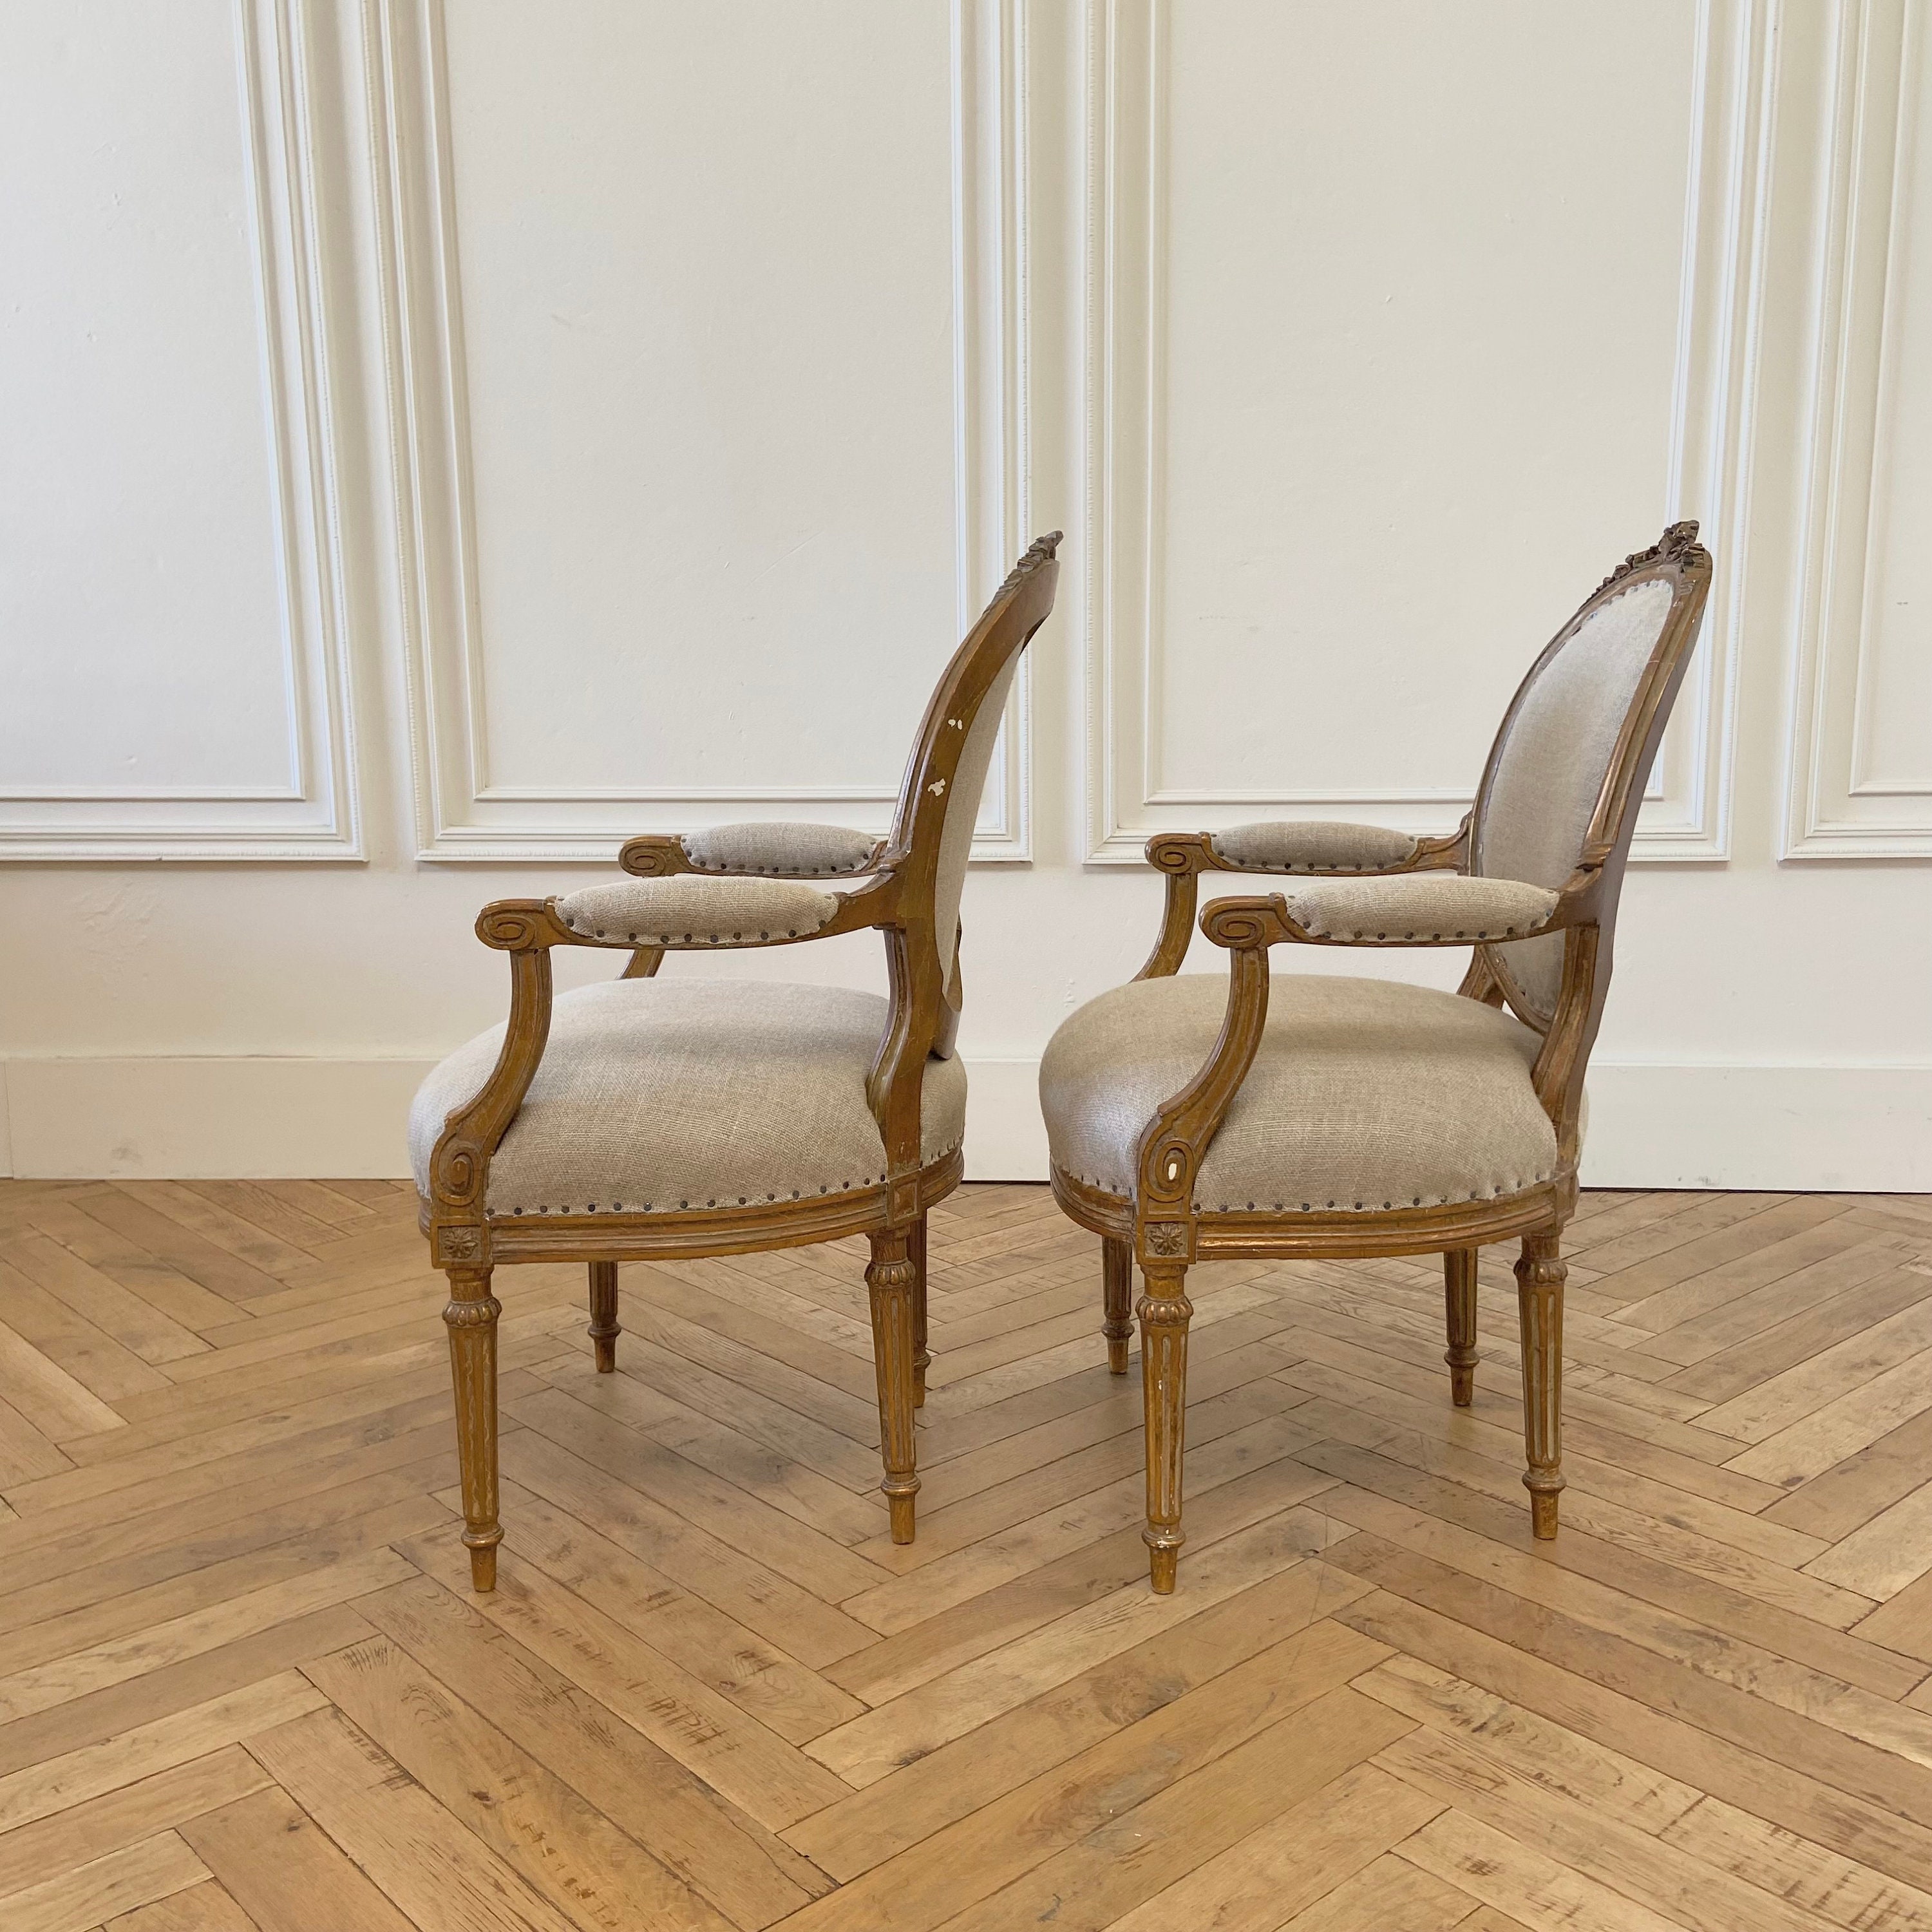 Antique Pair of Gilt Wood Open Arm Chairs Upholstered in Natural Linen –  bloomhomeinc